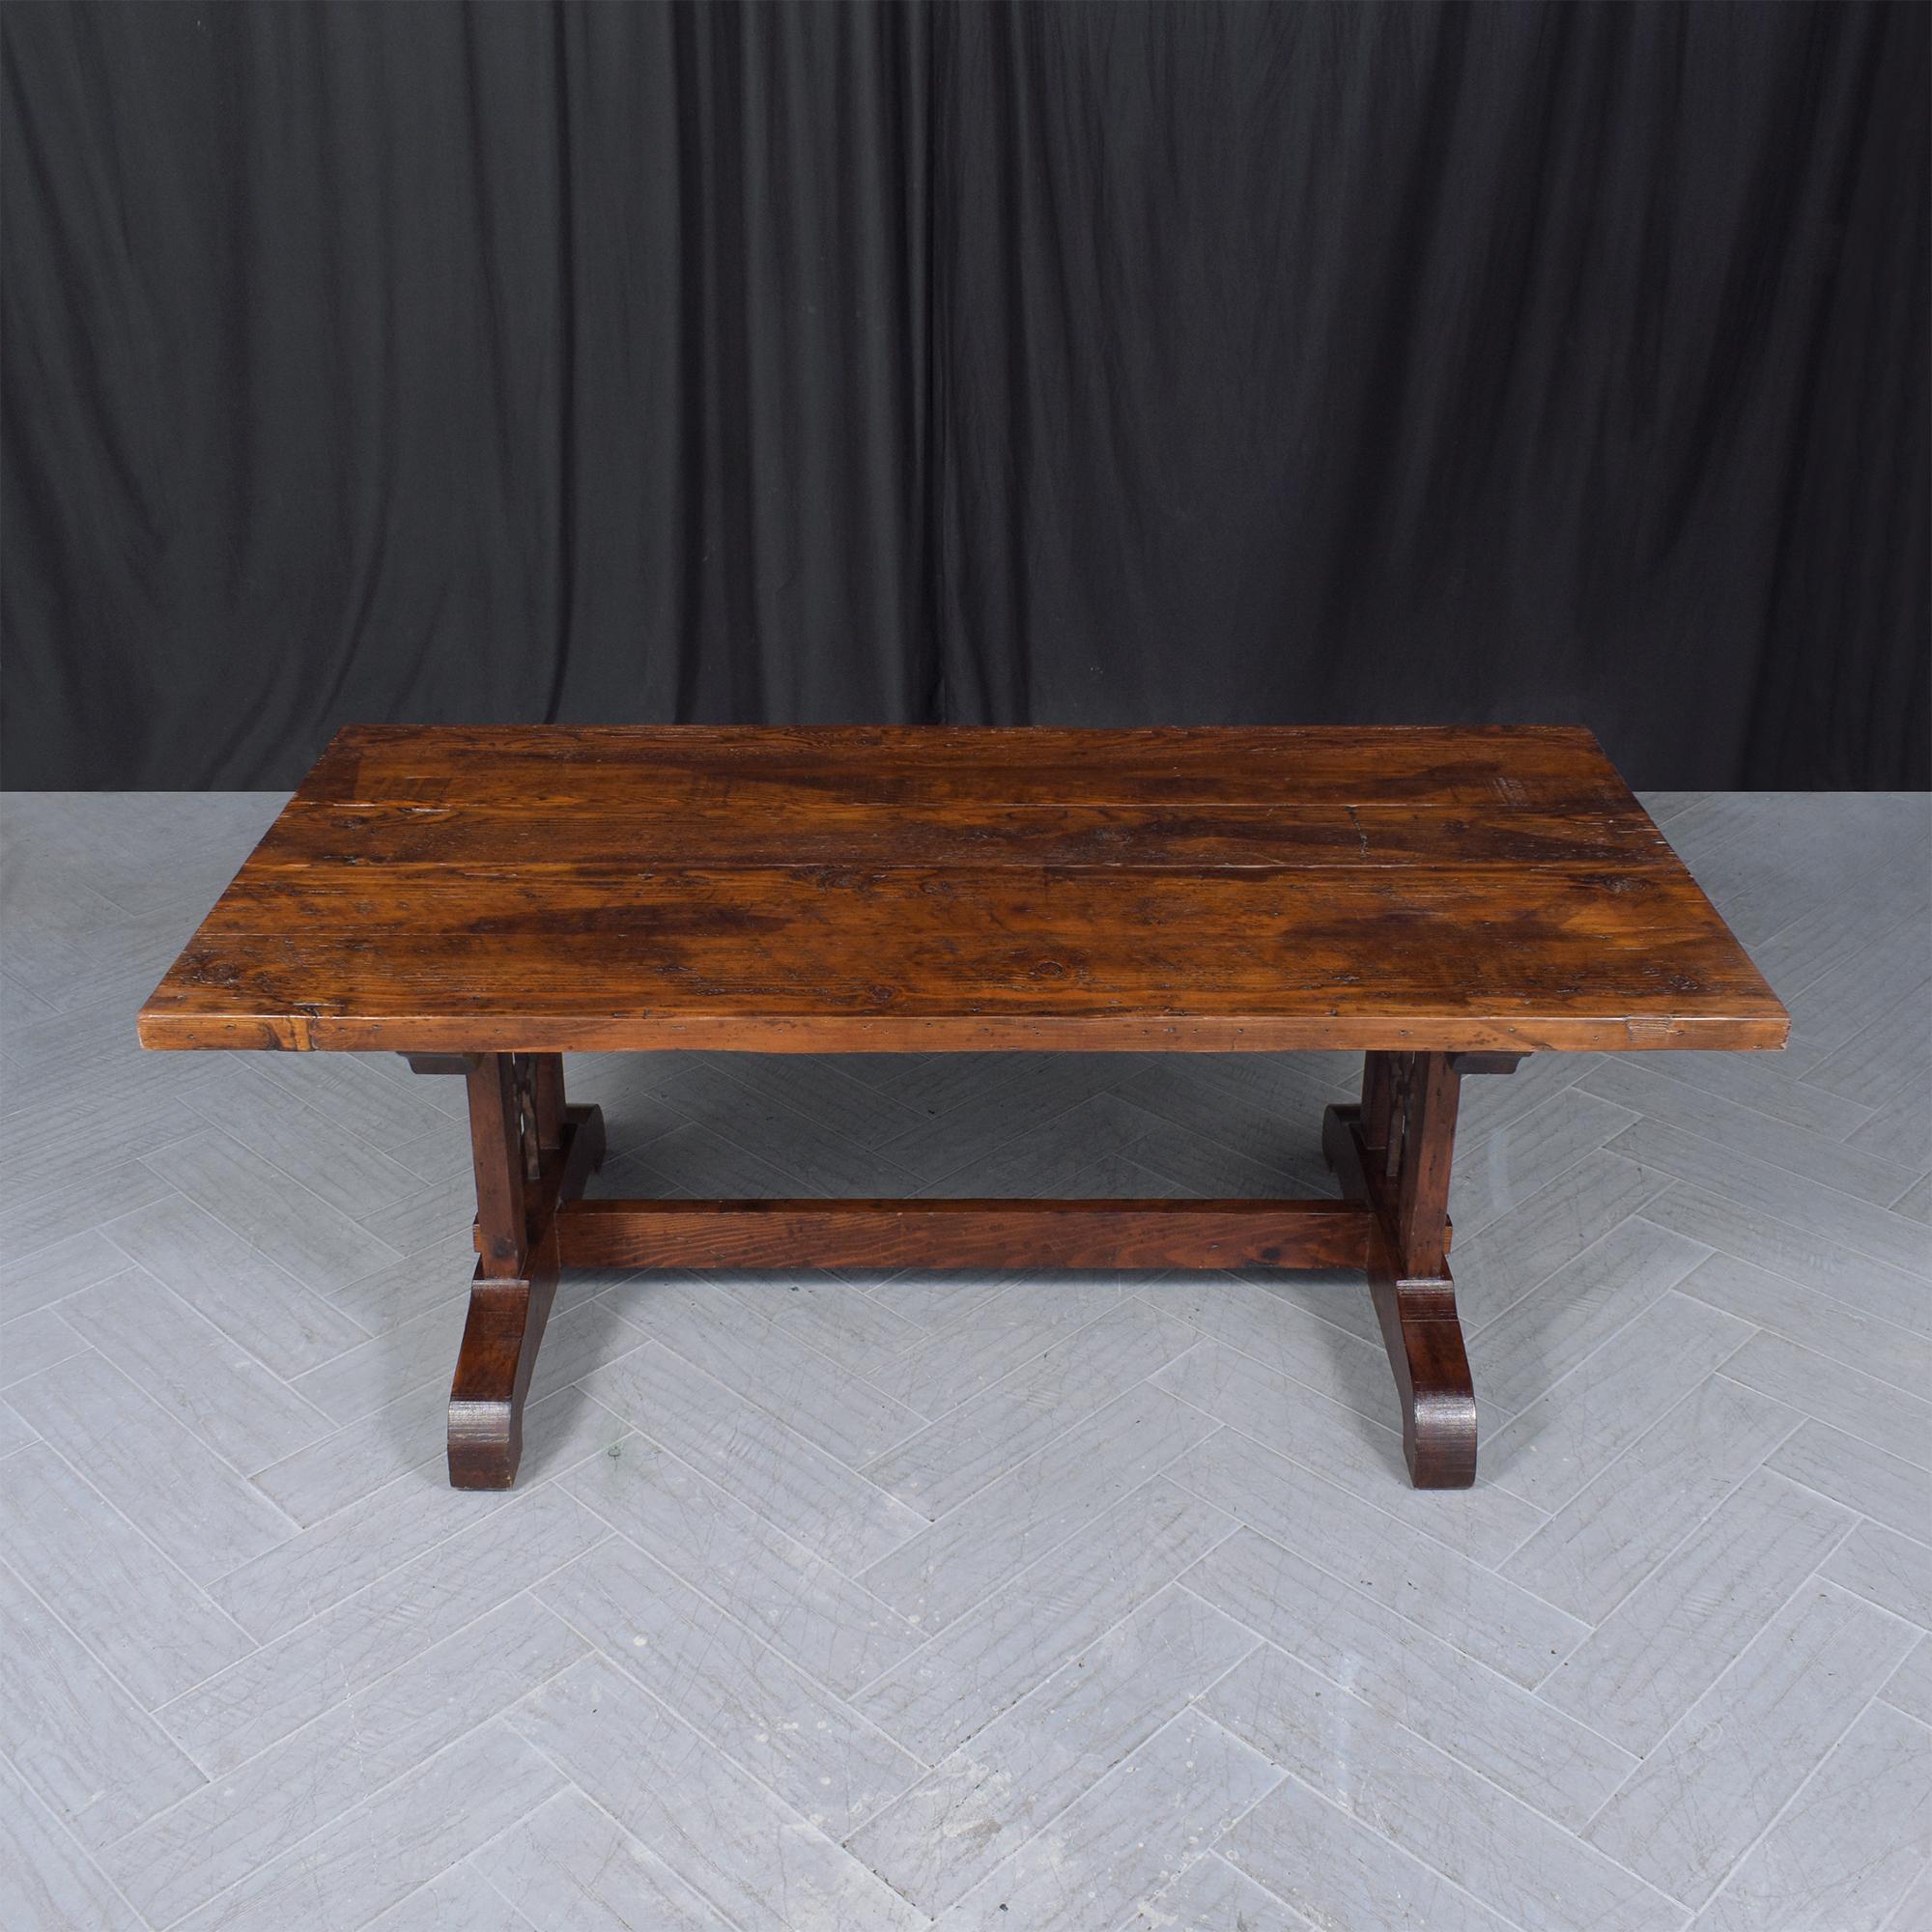 Vintage Solid Wood Dining Table with Iron Accents and Pedestal Legs For Sale 4